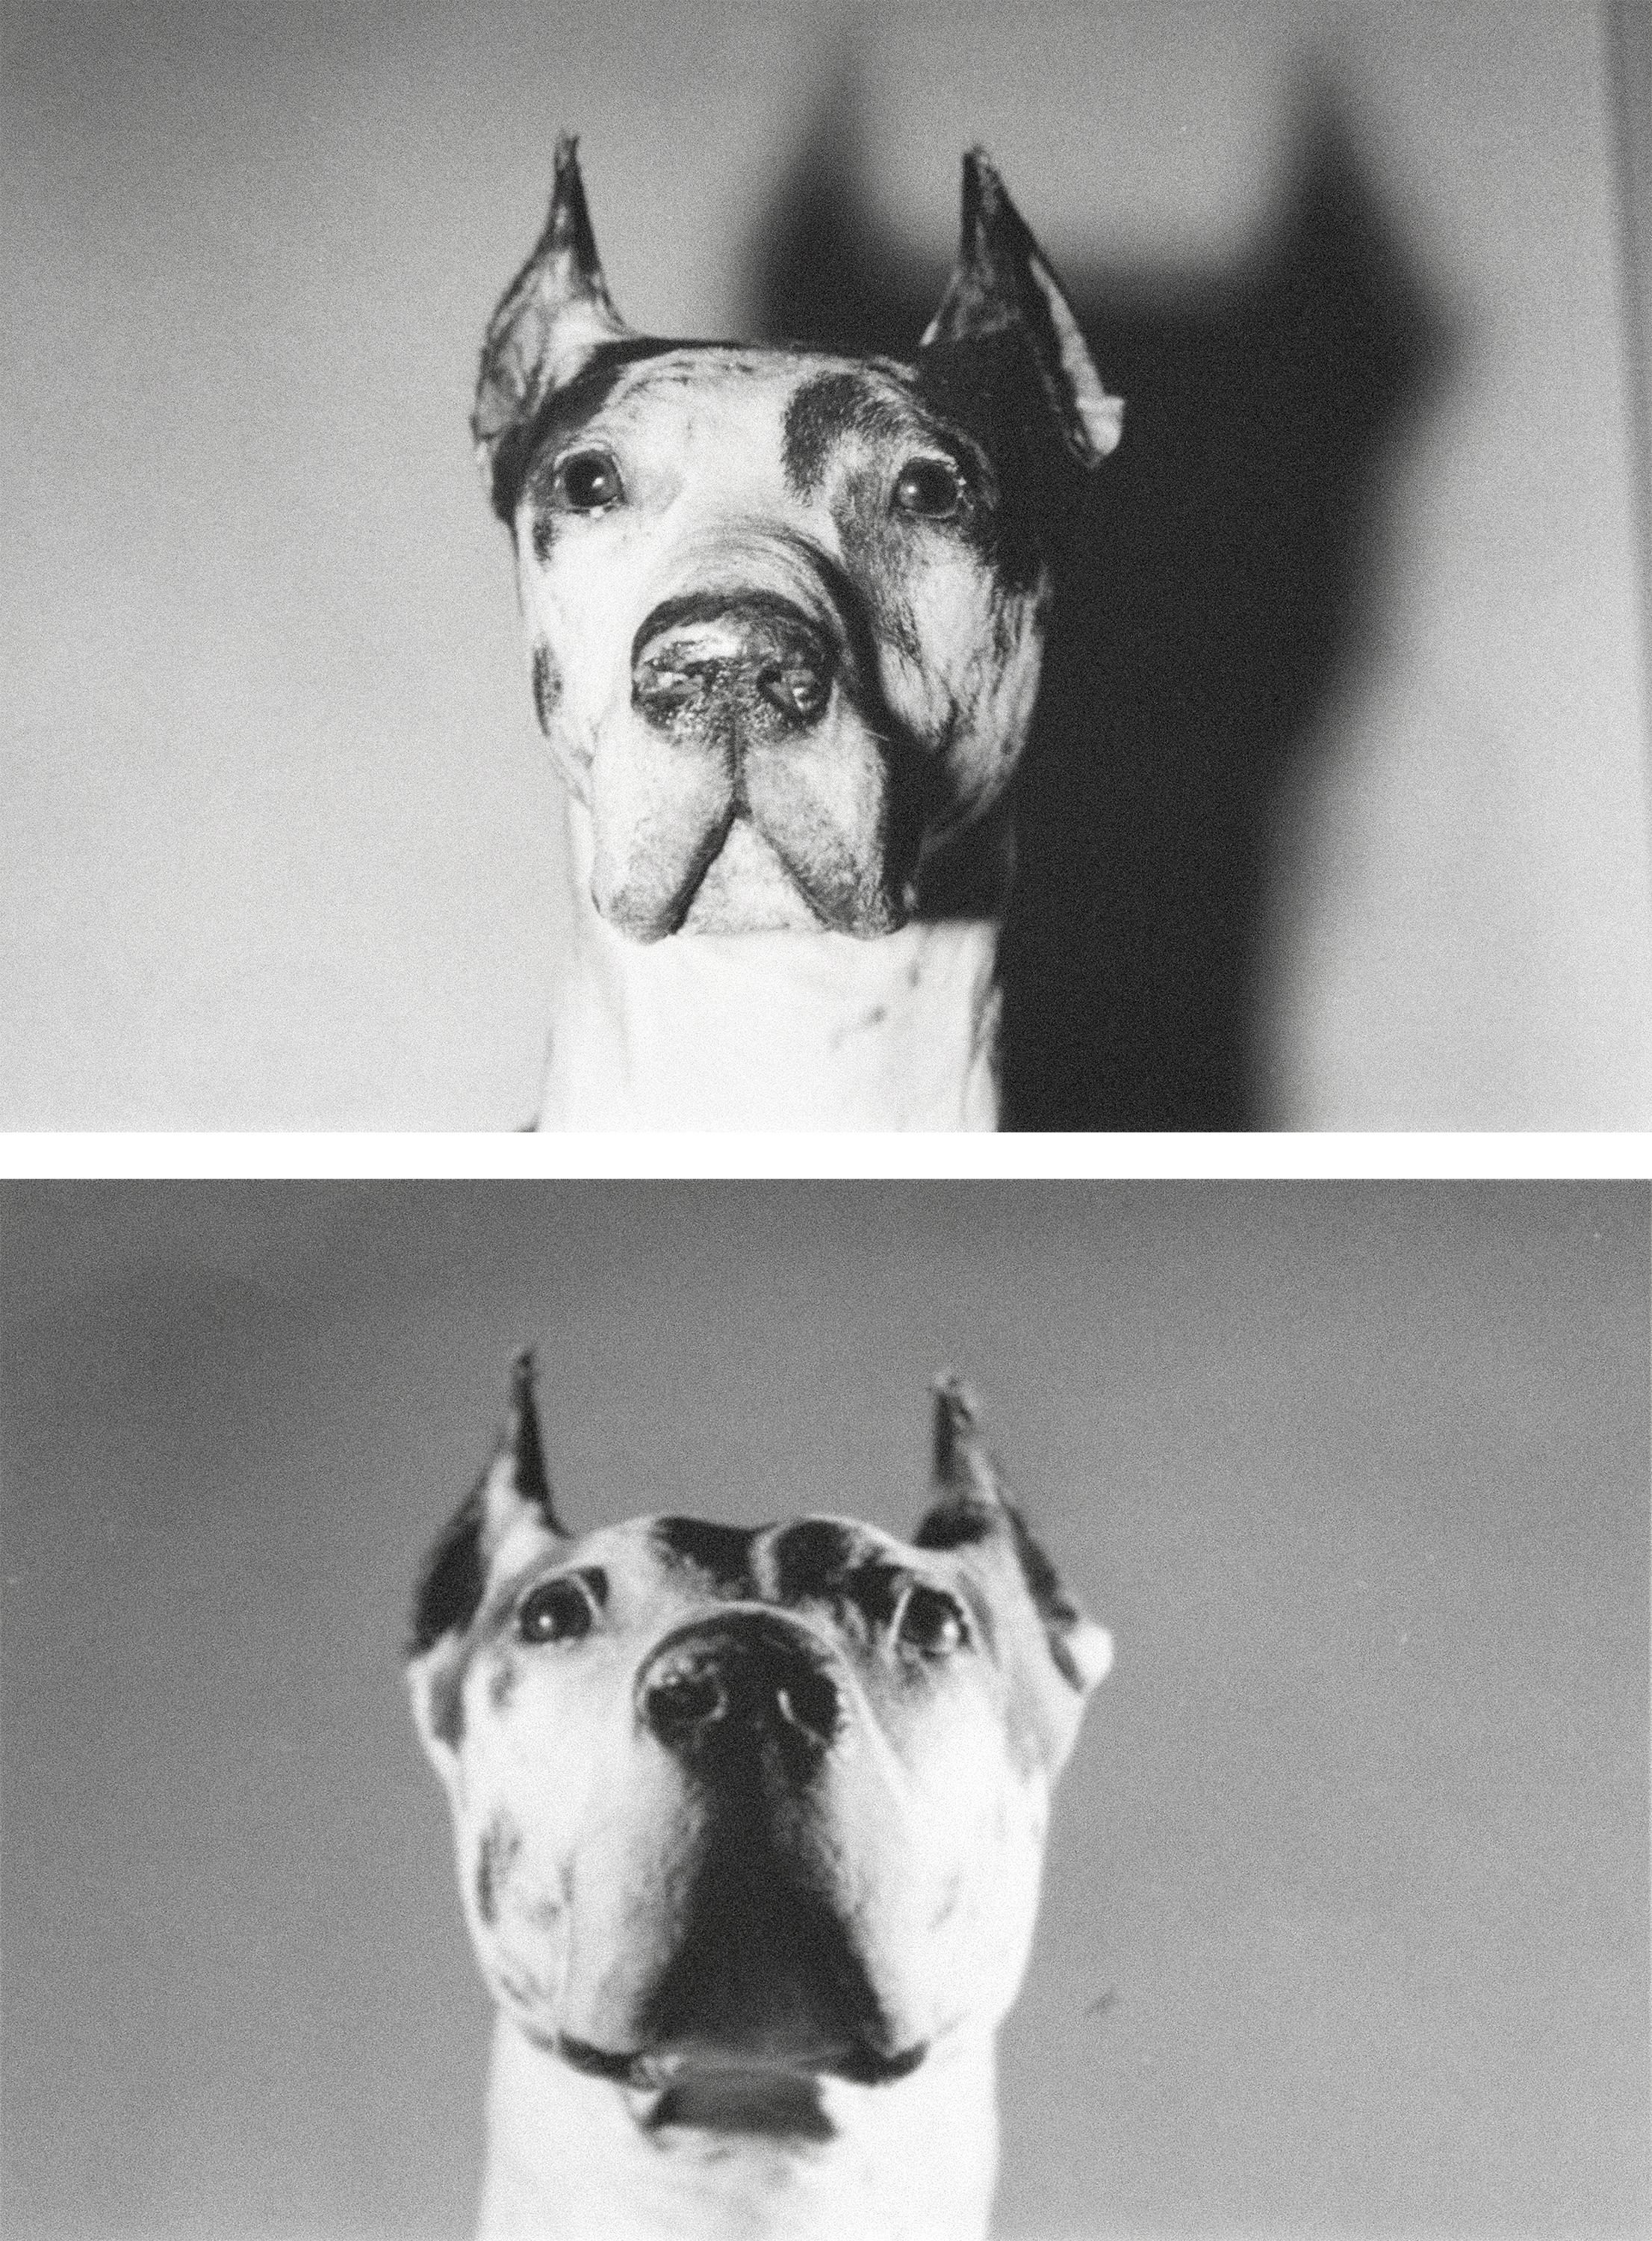 Andy Warhol Portrait Photograph - Dogs